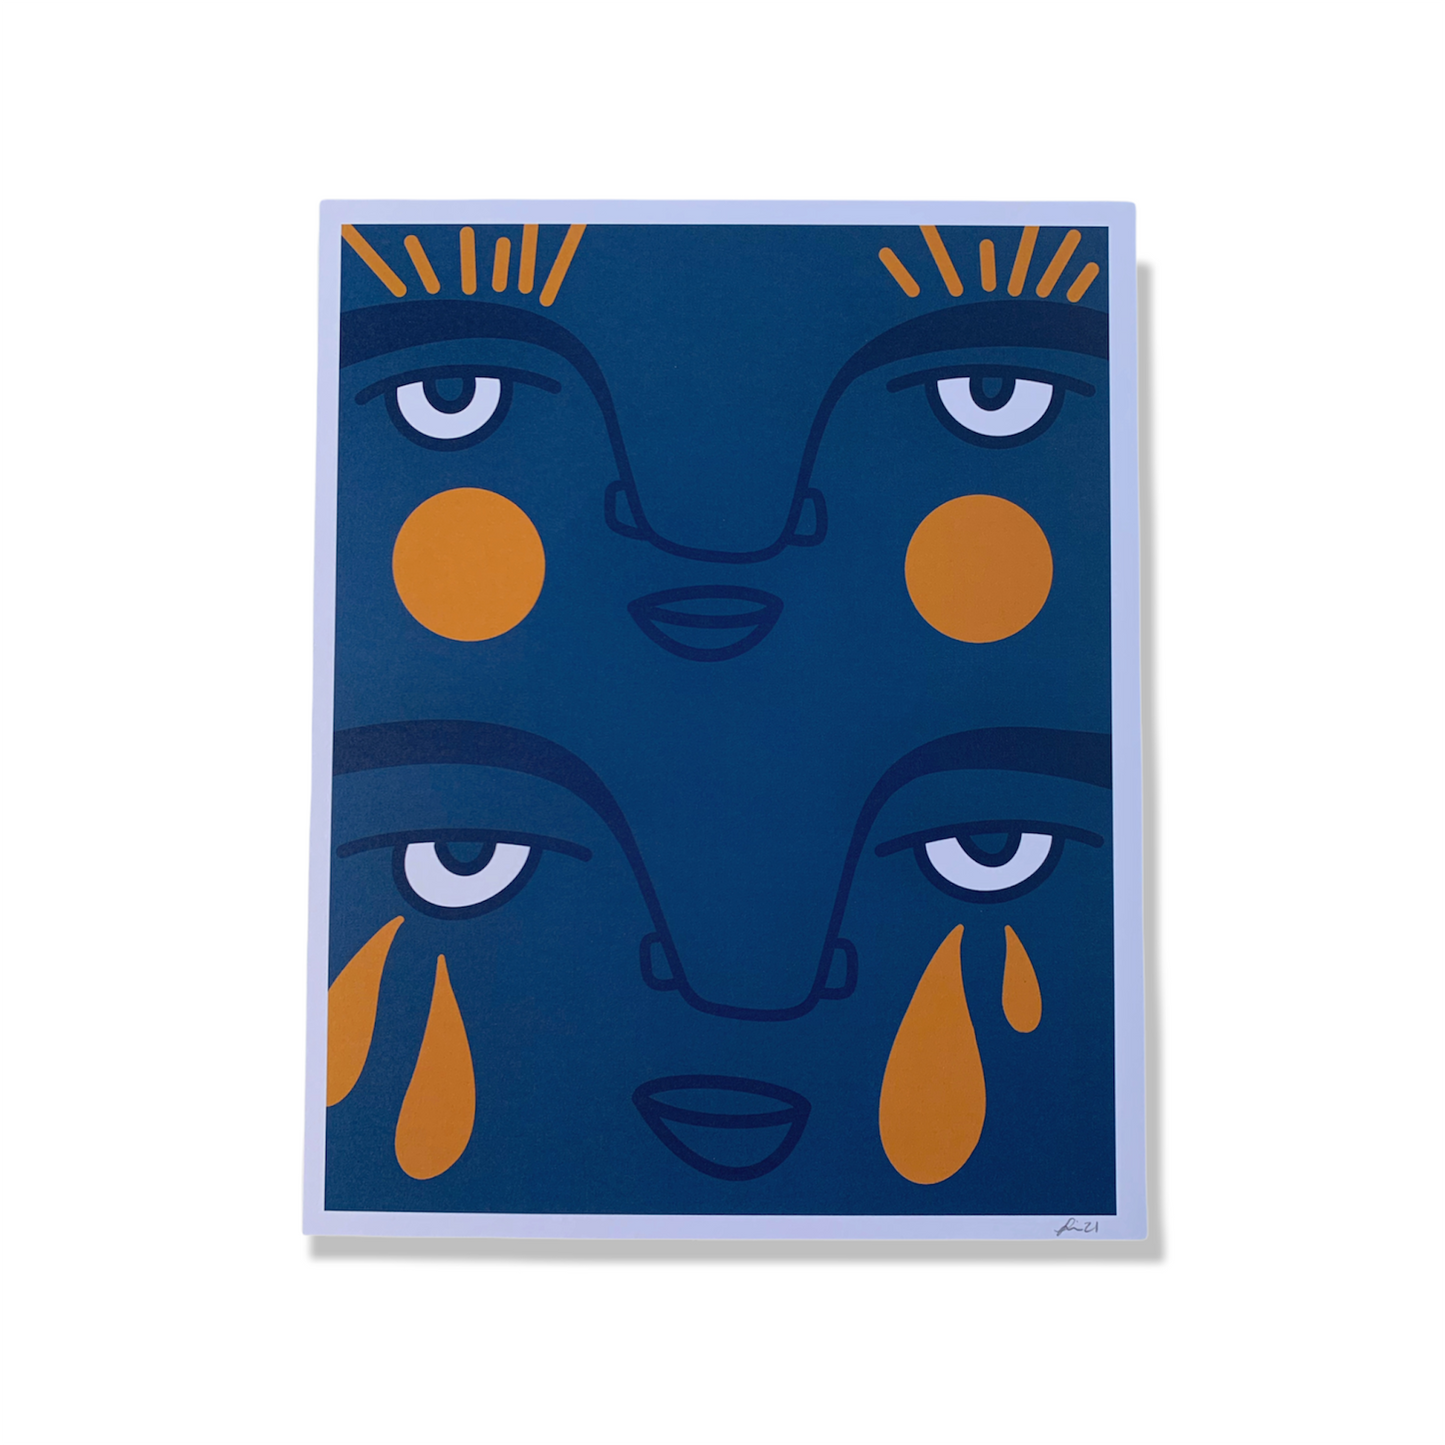 Blue and yellow abstract face art print against white blackground